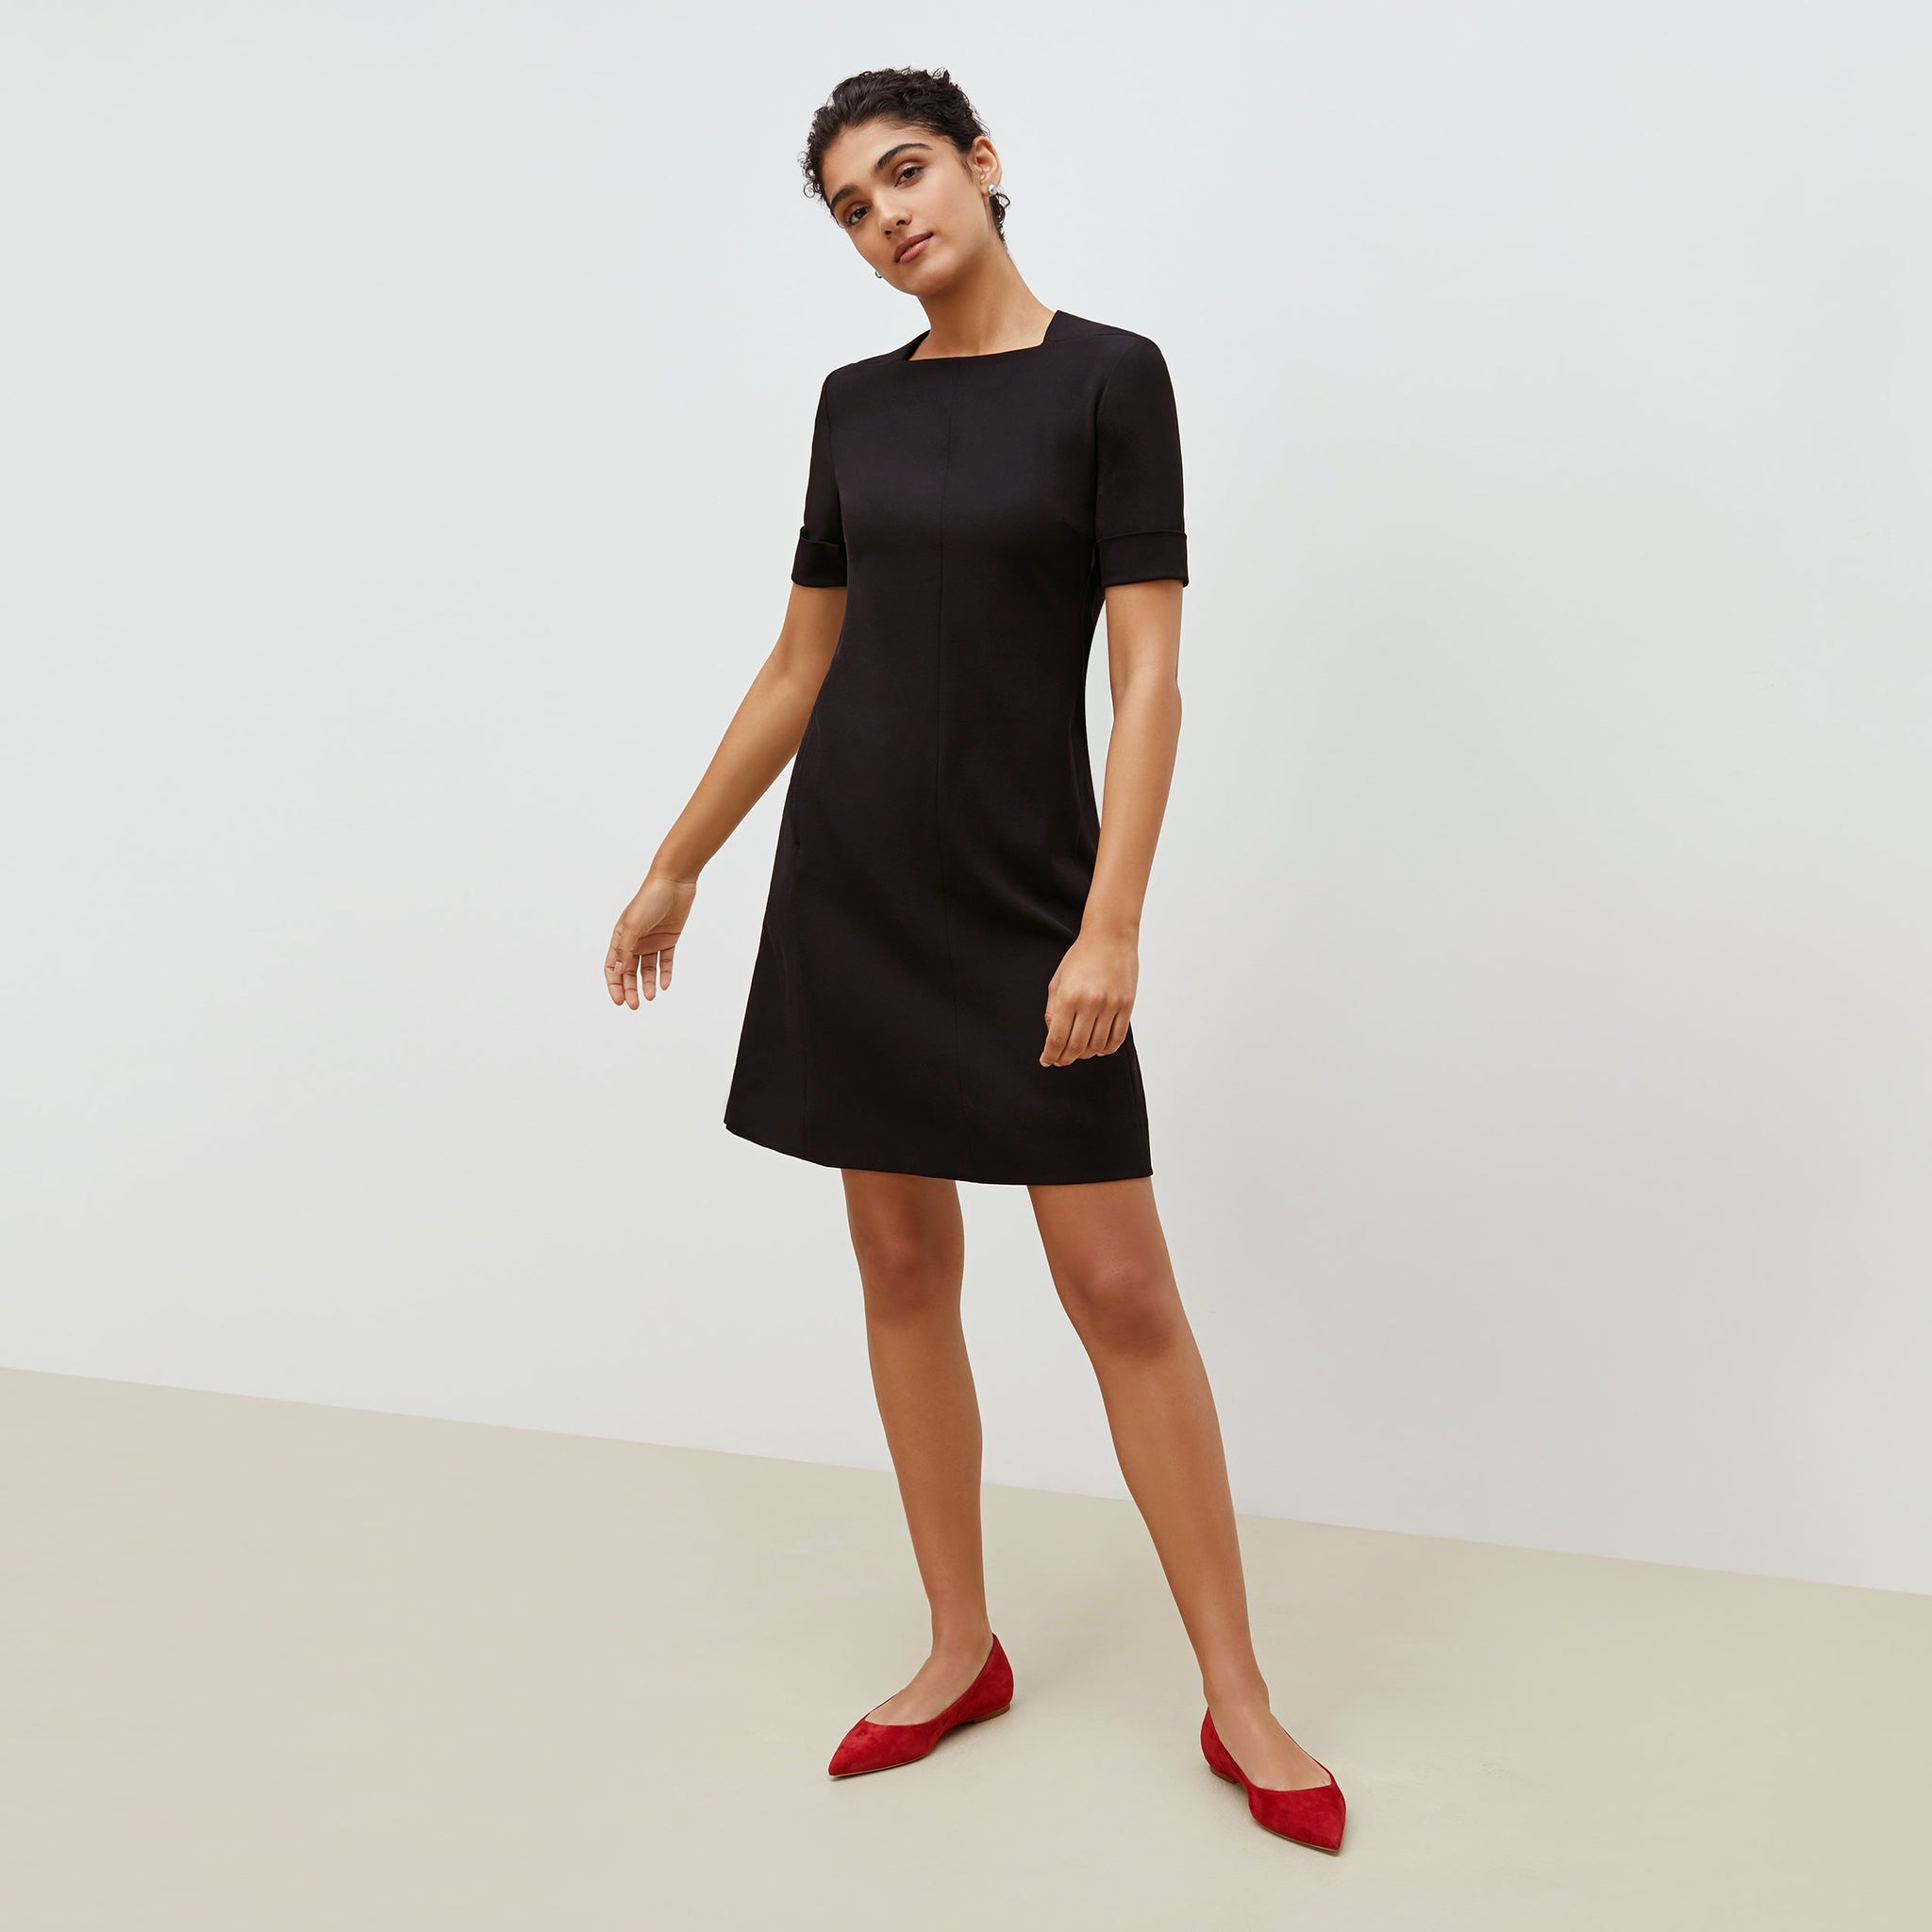 Front image of a woman standing wearing the emily dress in black